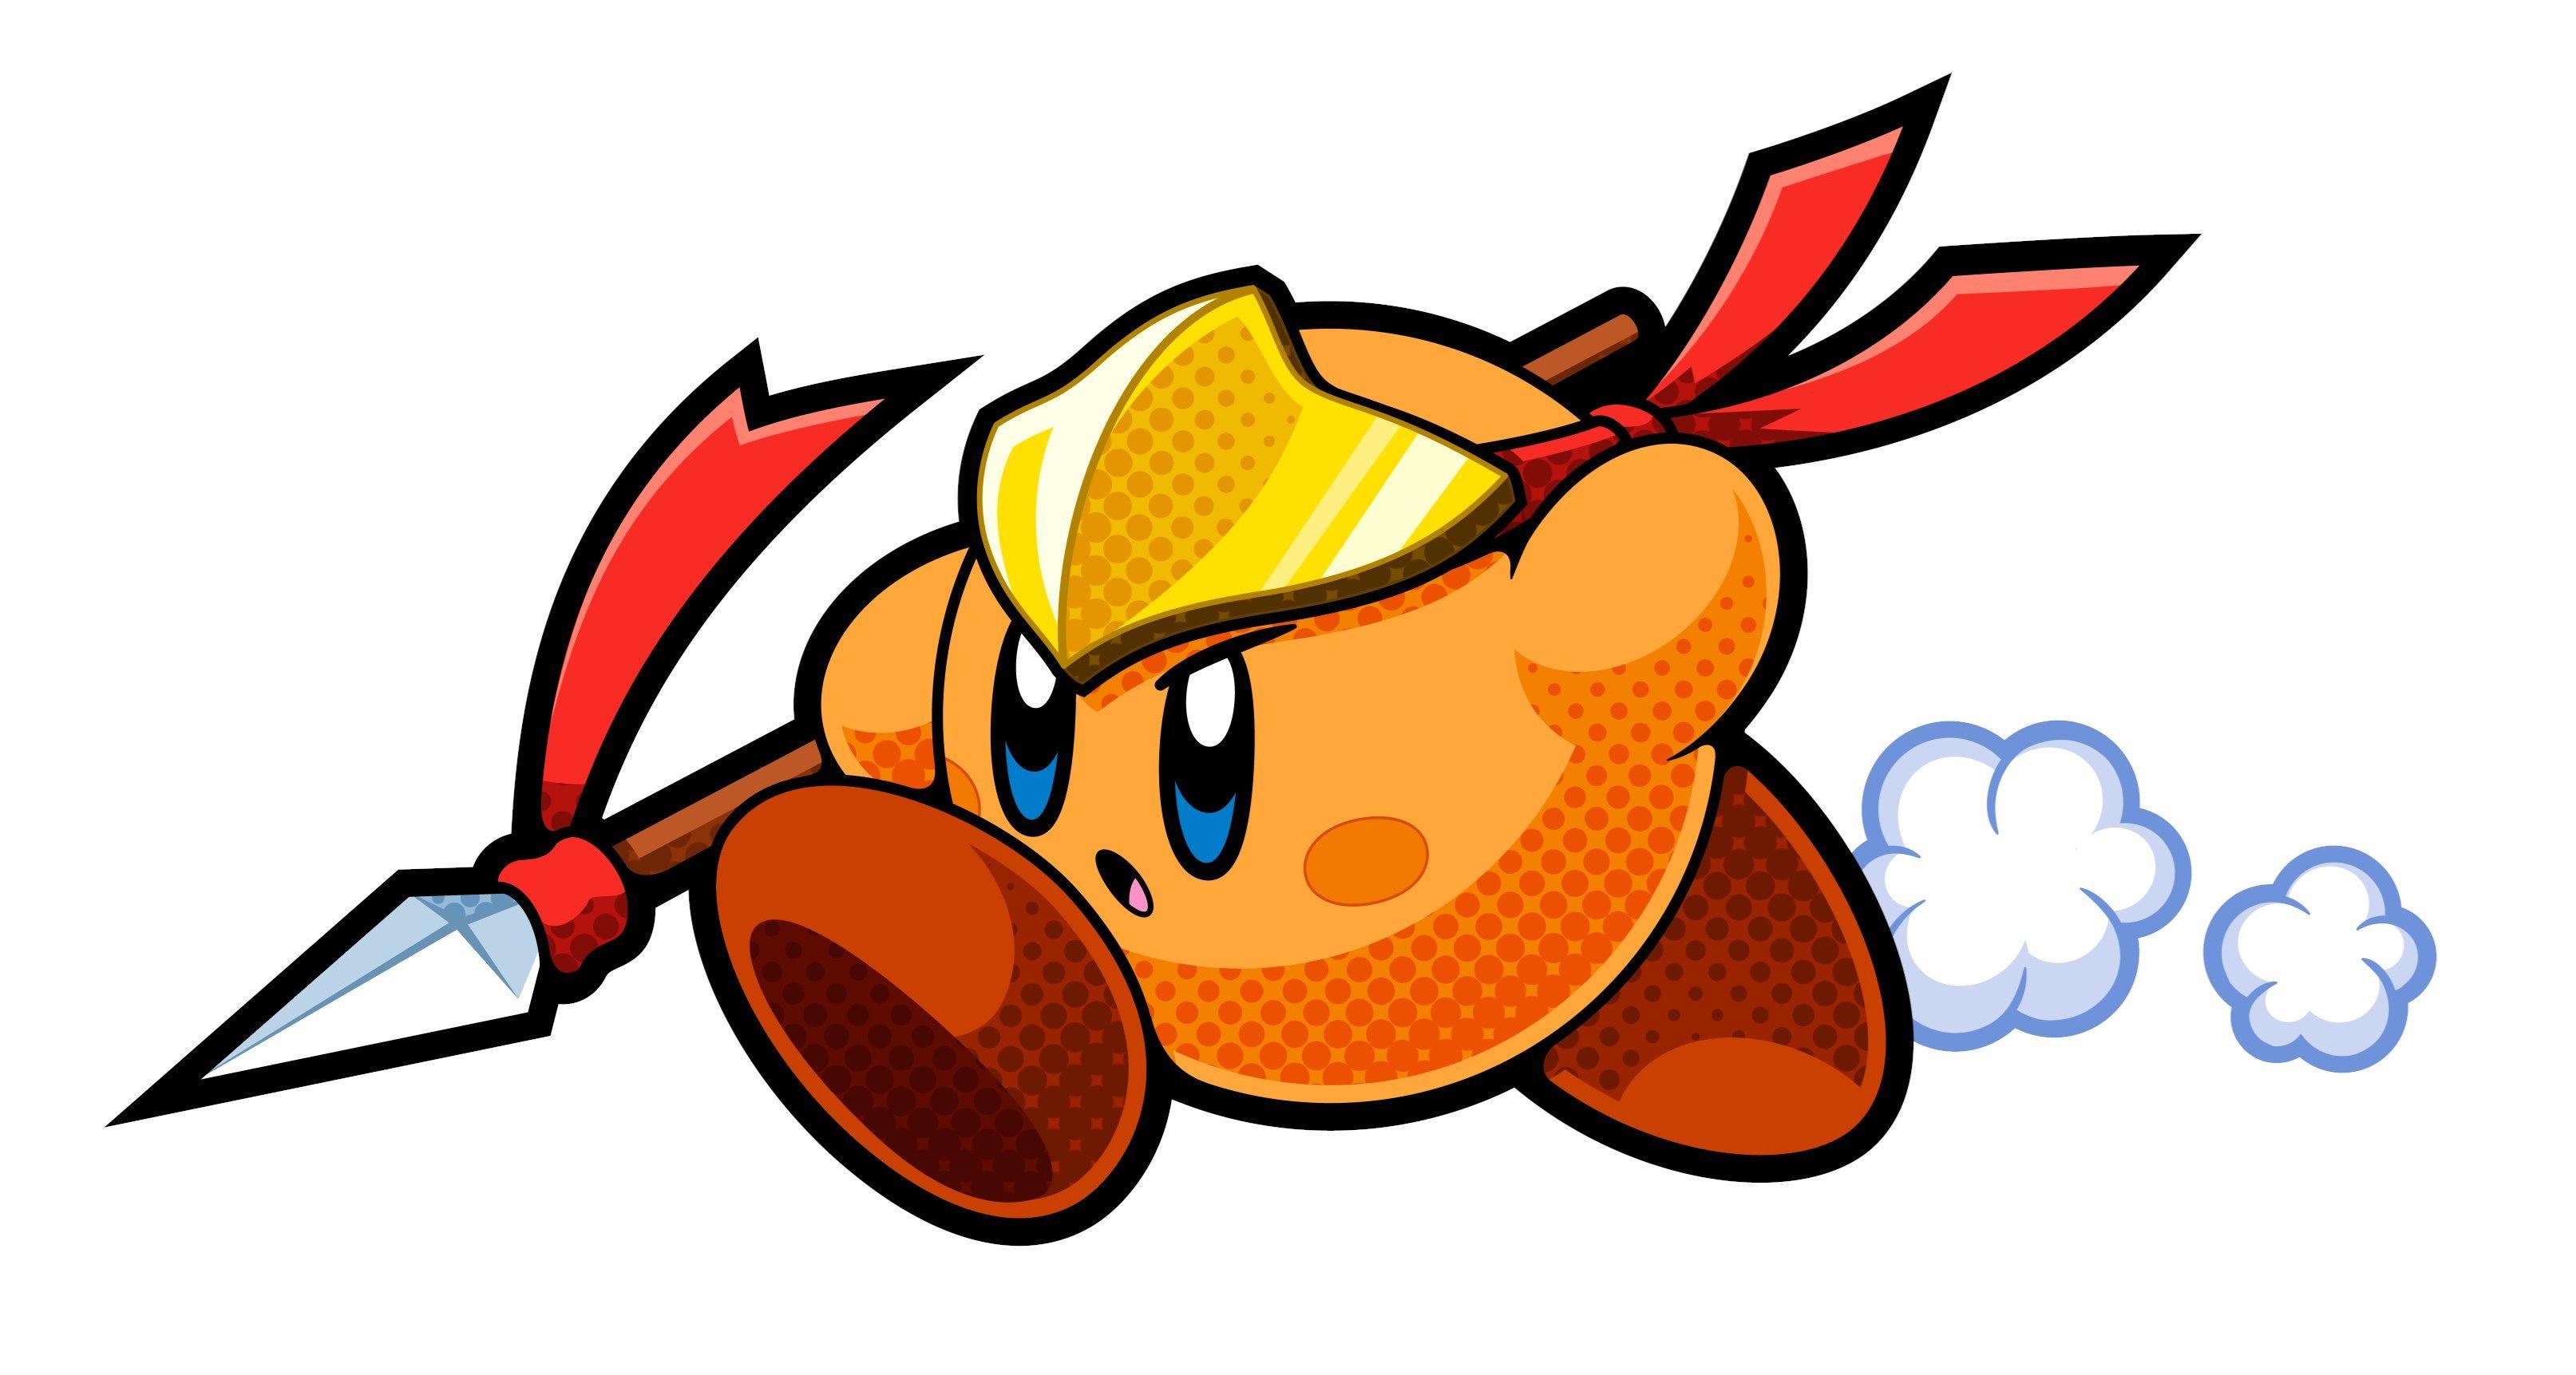 Check Out Some Adorable Kirby Battle Royale Wallpapers - My